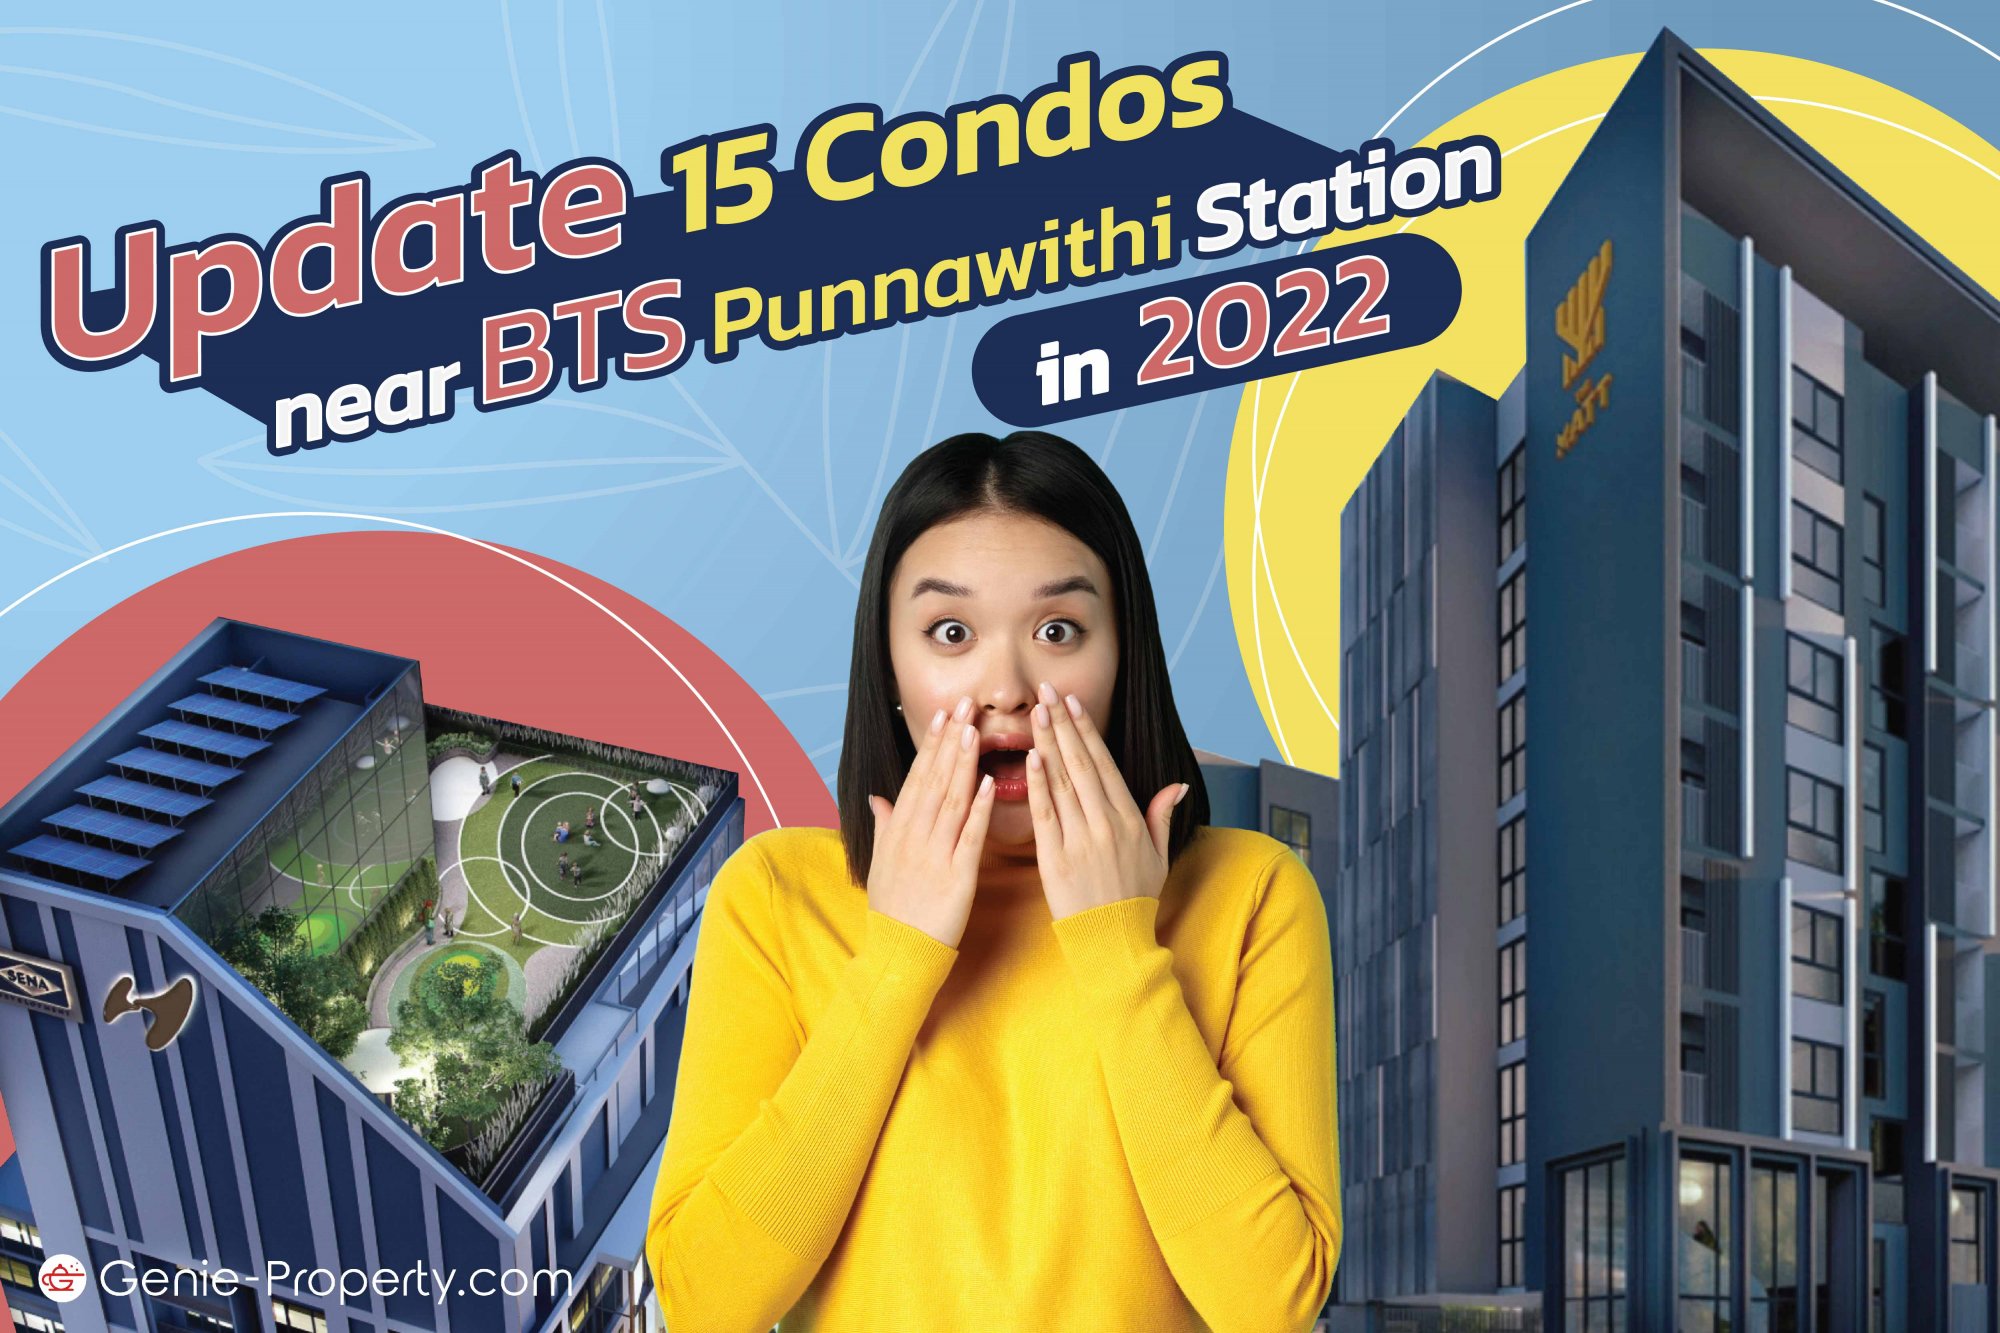 image for Update 15 Condos near BTS Punnawithi Station in 2022